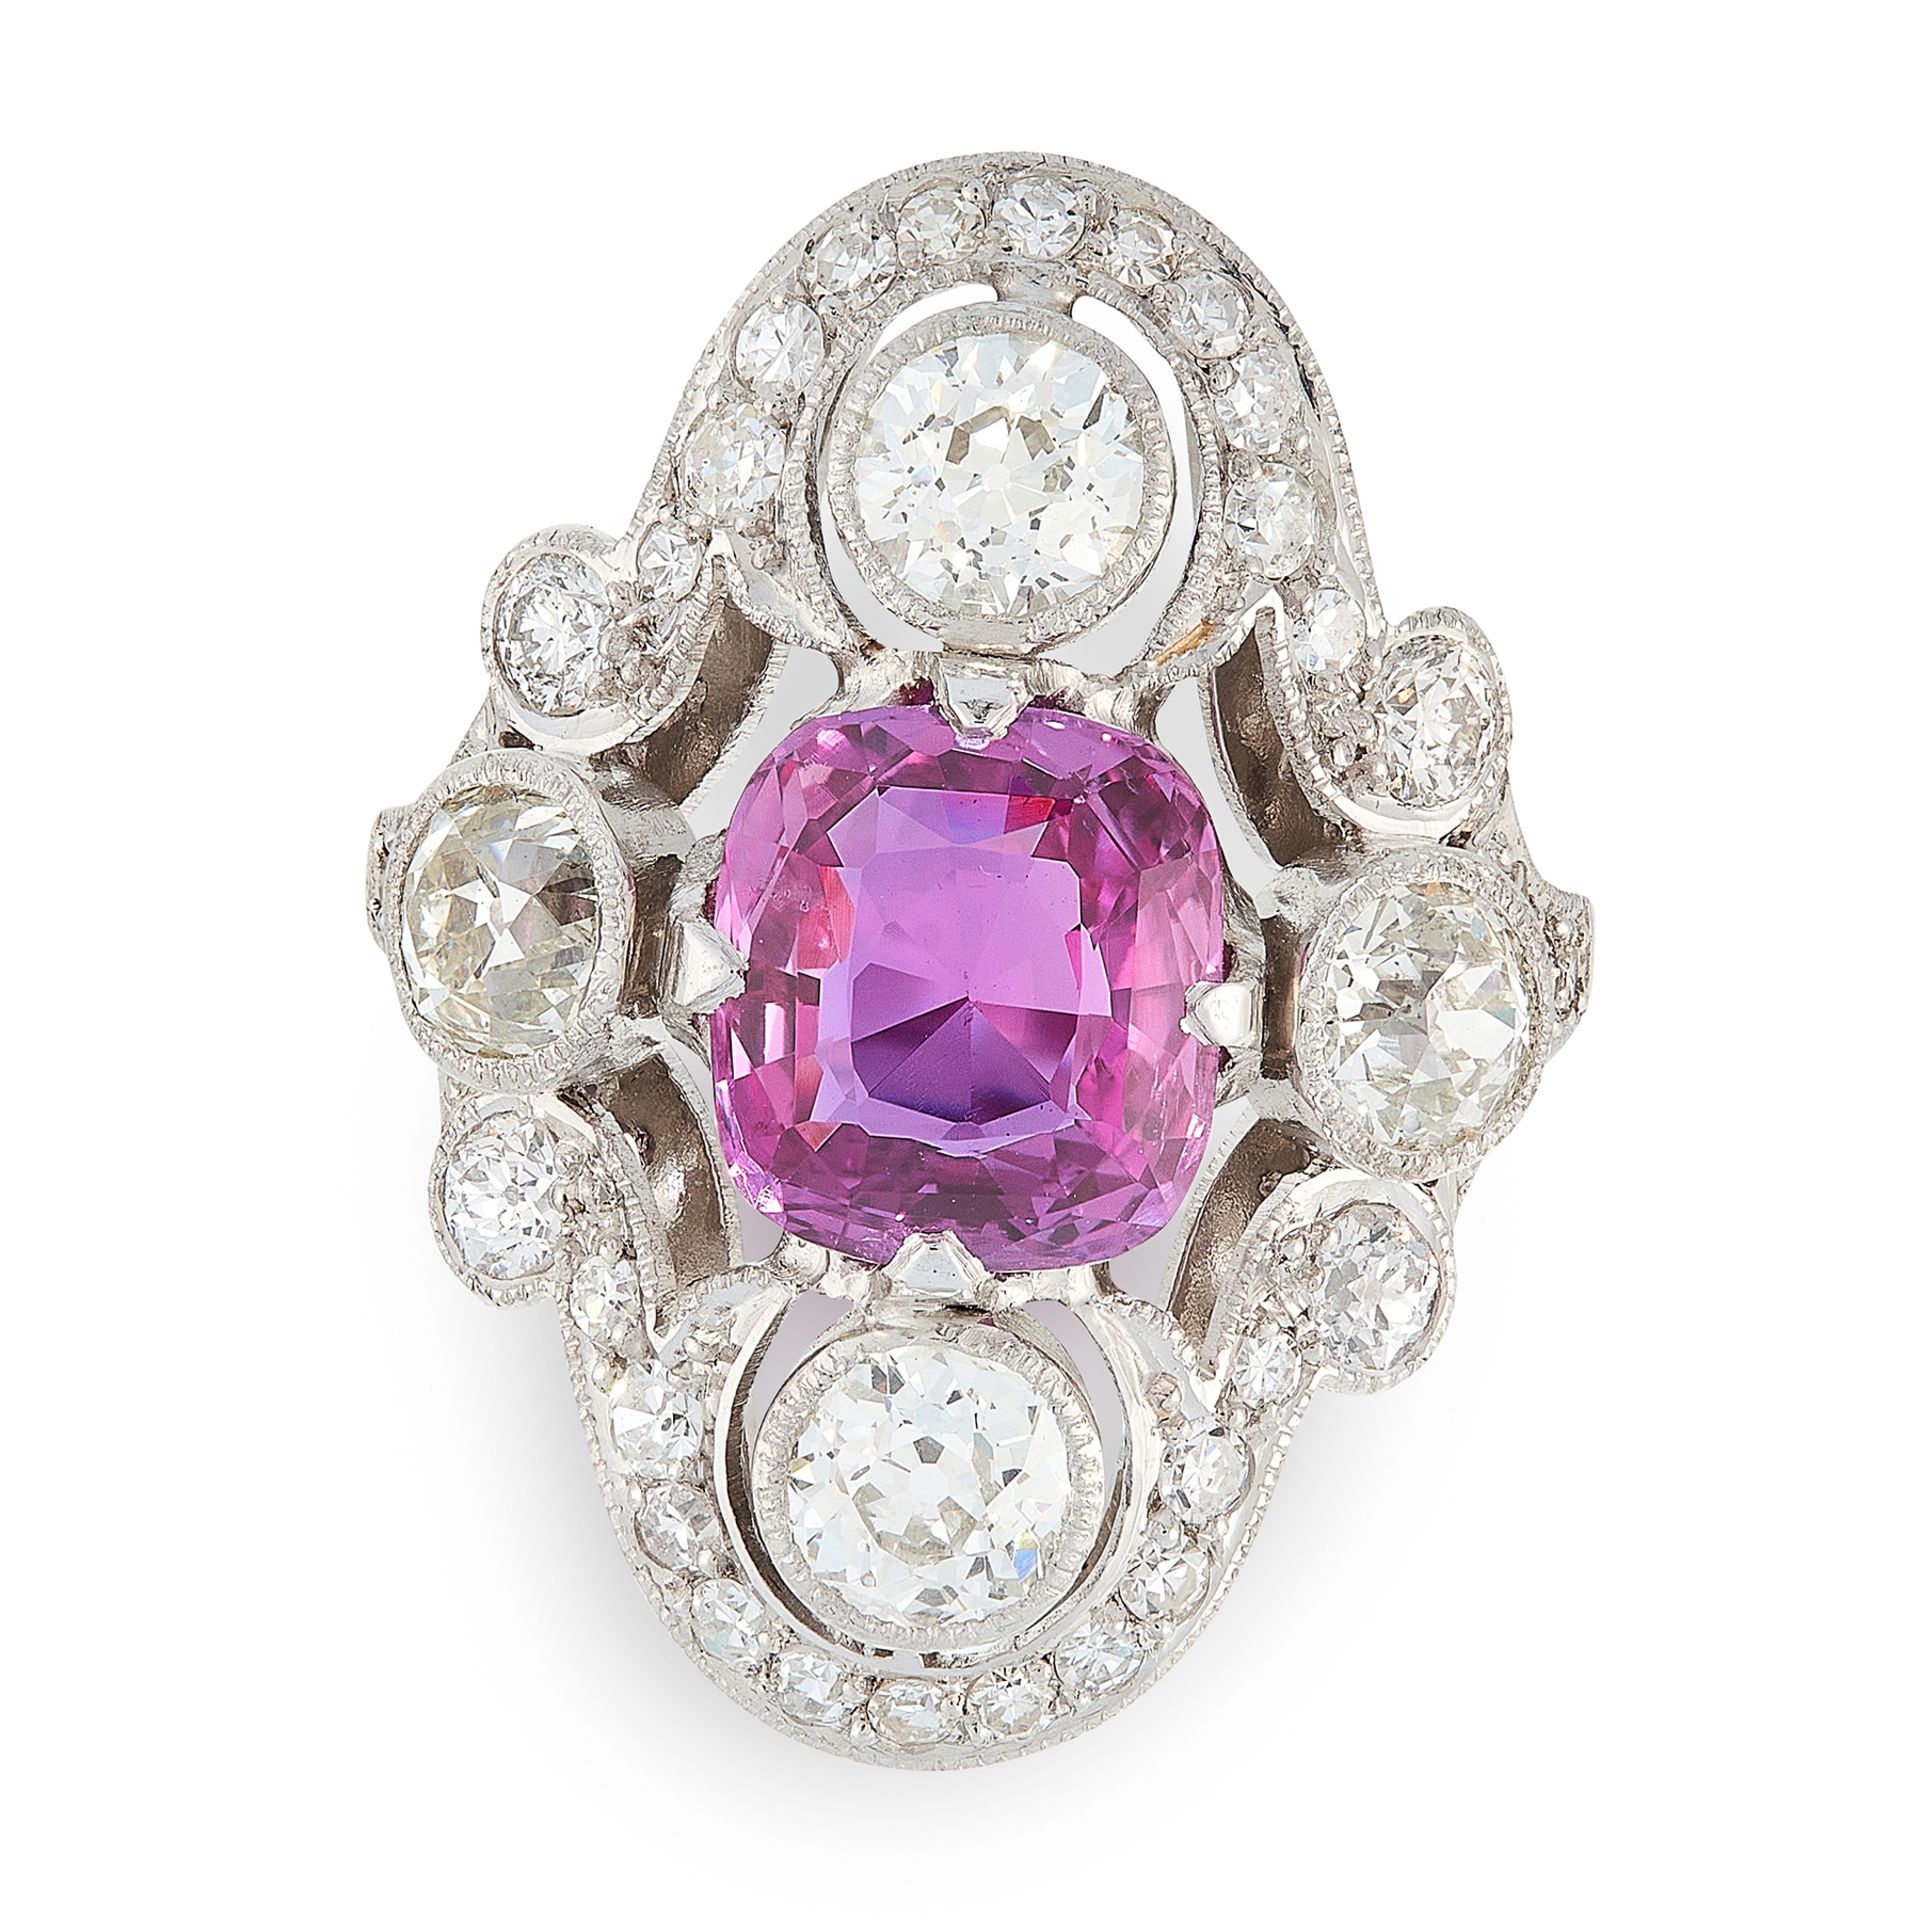 A CEYLON NO HEAT PINK SAPPHIRE AND DIAMOND DRESS RING set with a cushion cut pink sapphire of 3.45